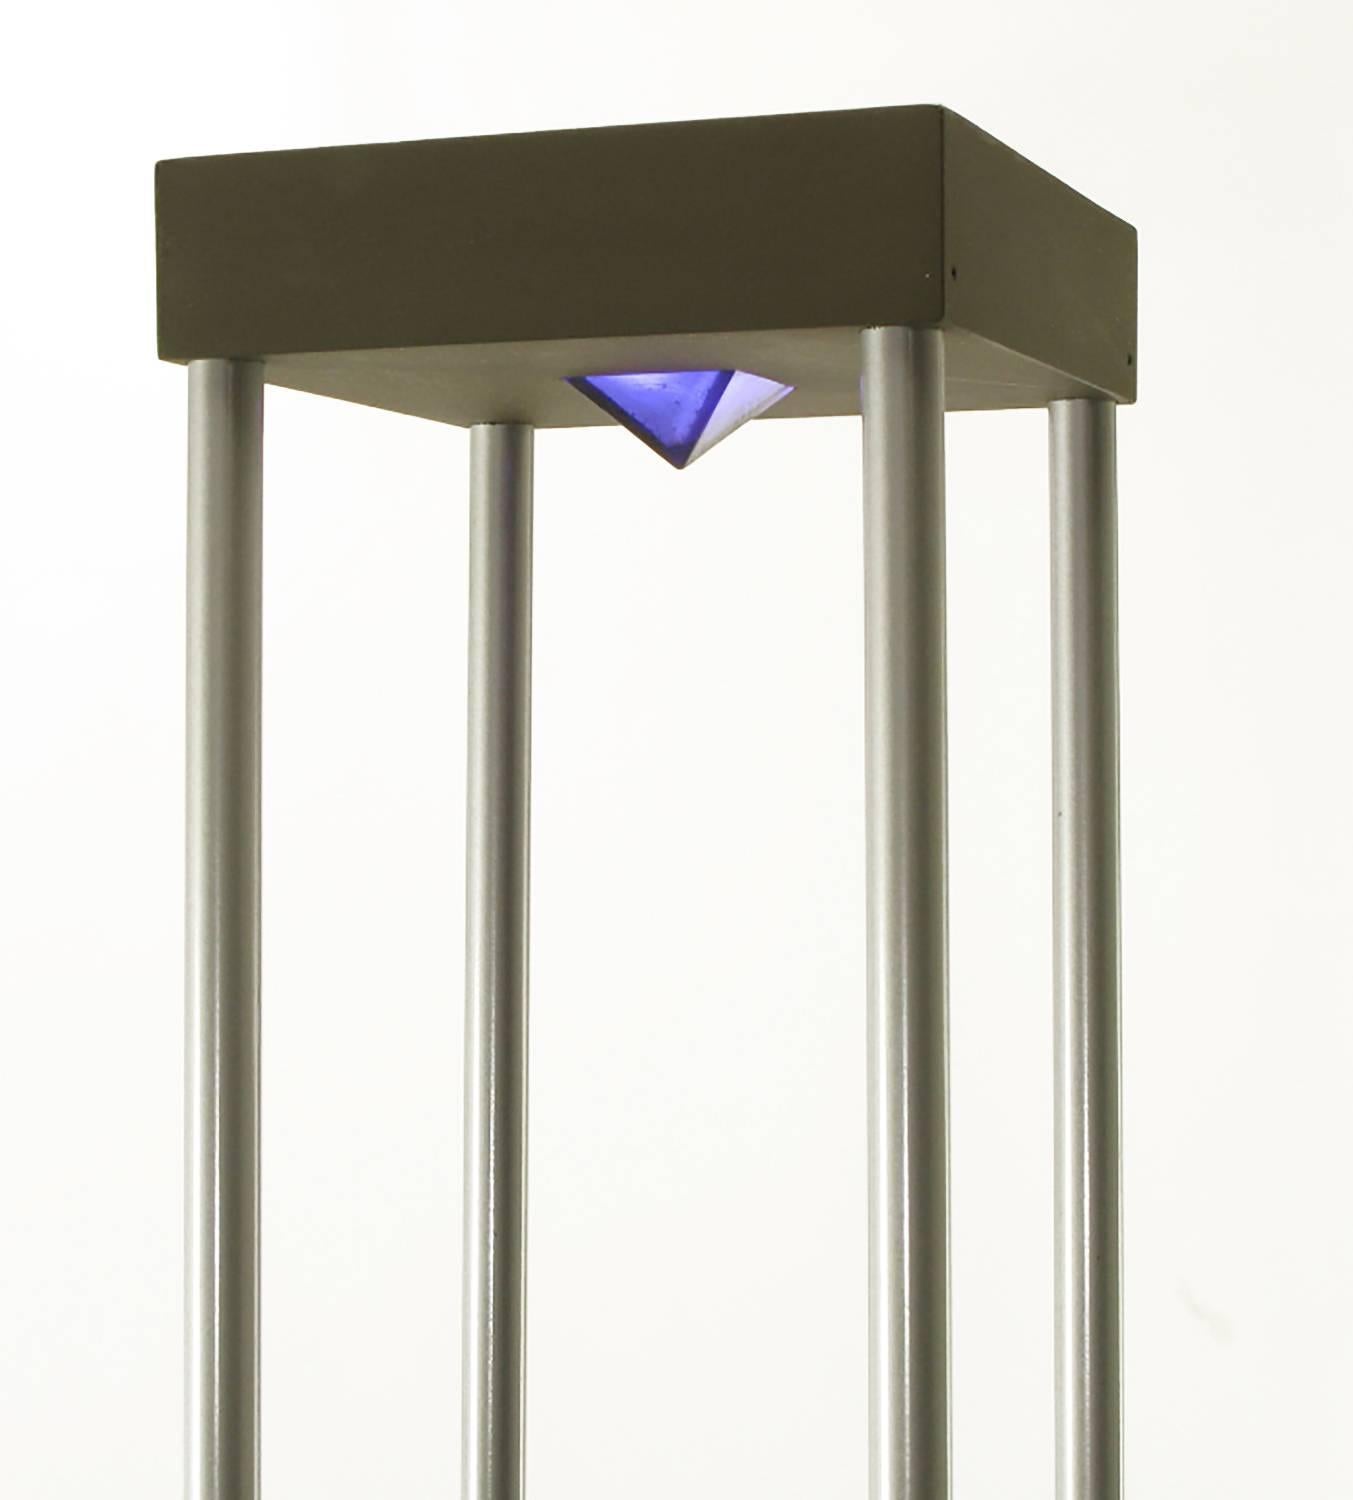 Italian Pair of Memphis-Style Postmodern Floor Lamps with Cobalt Blue Glass Pyramids For Sale